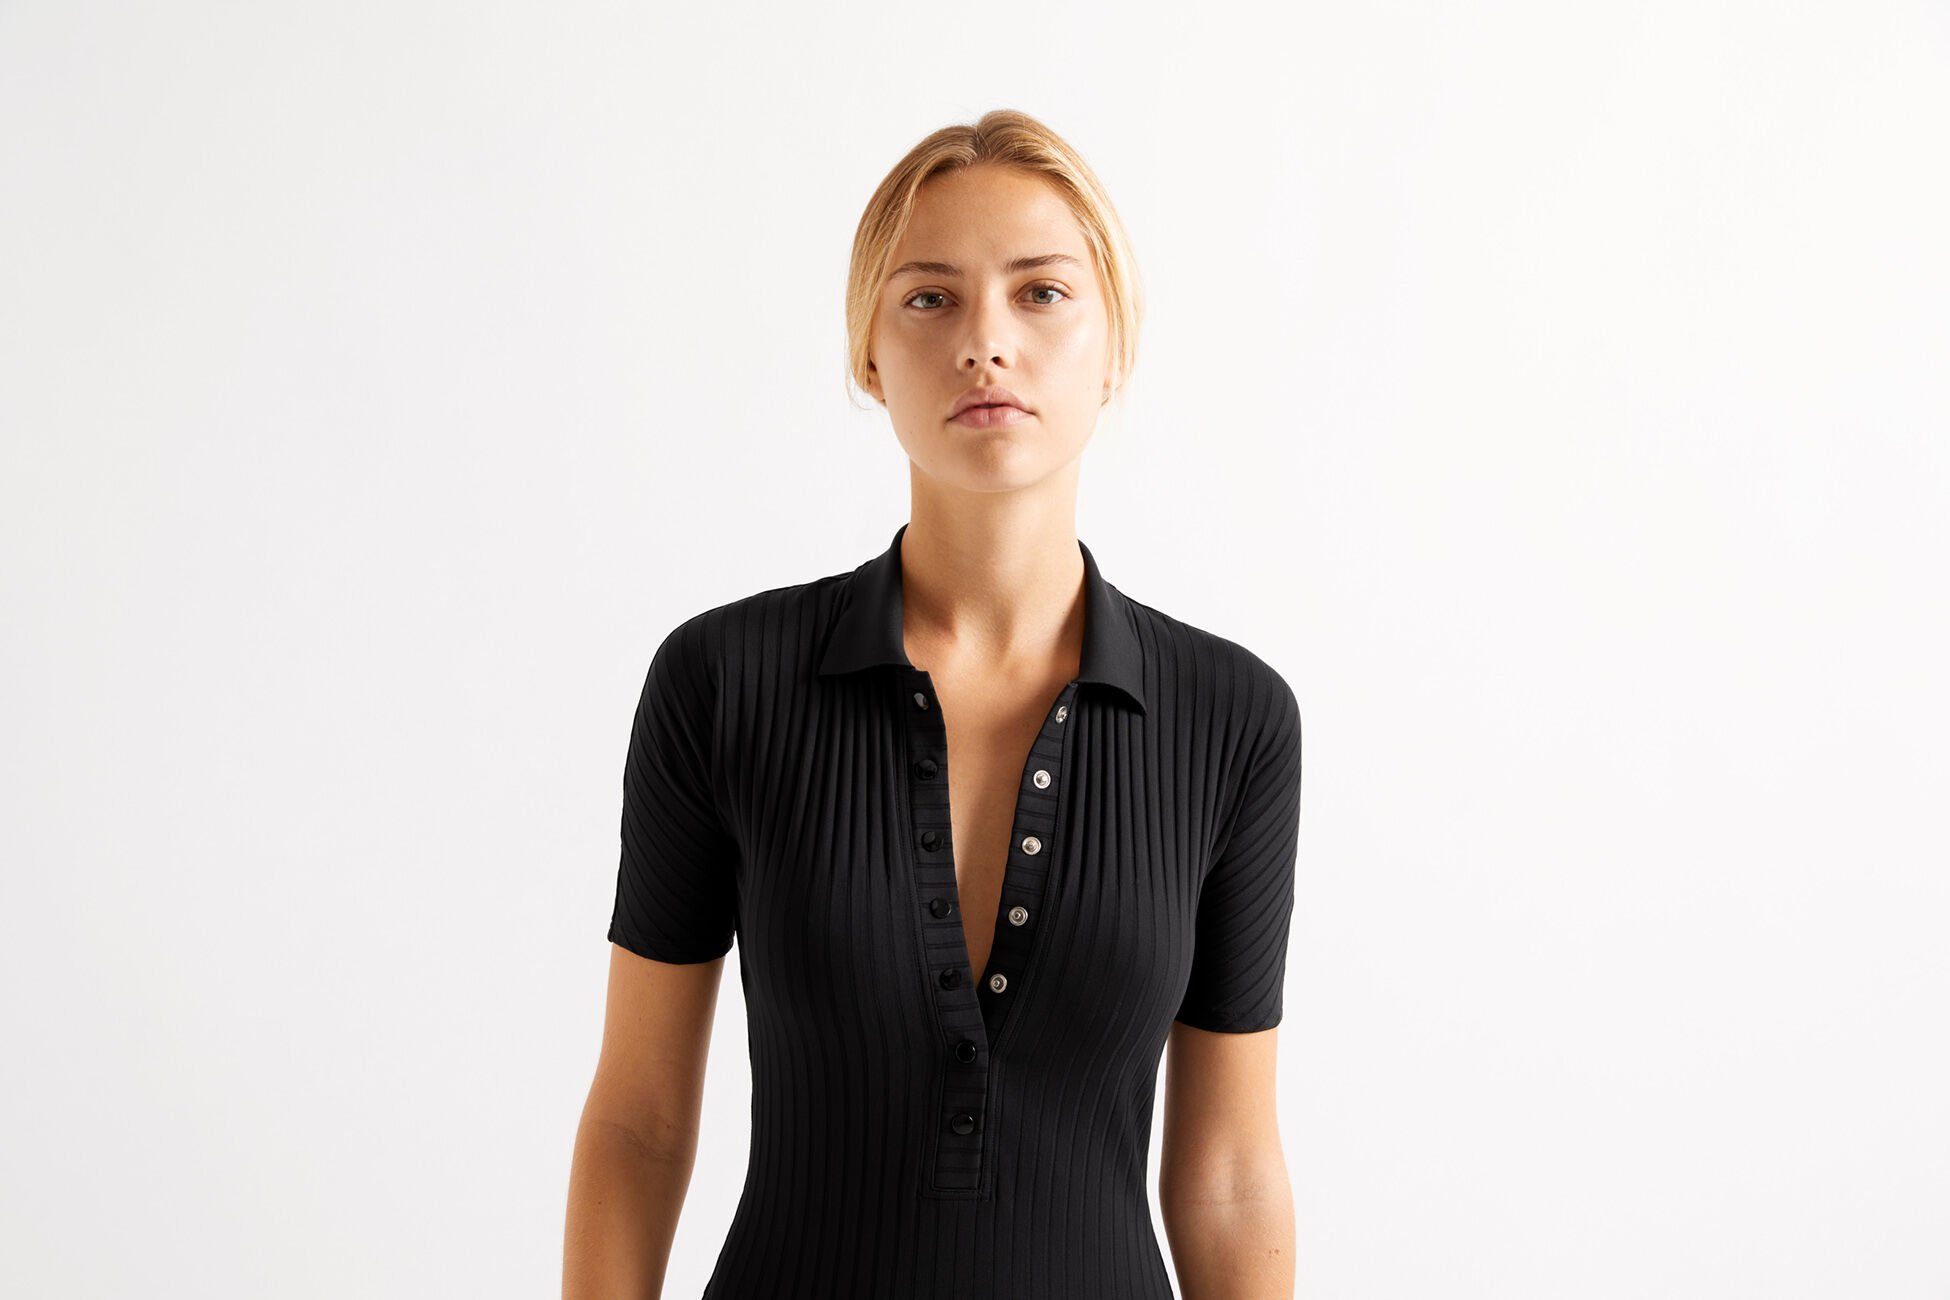 Cachaca Sophisticated one-piece standard view NaN